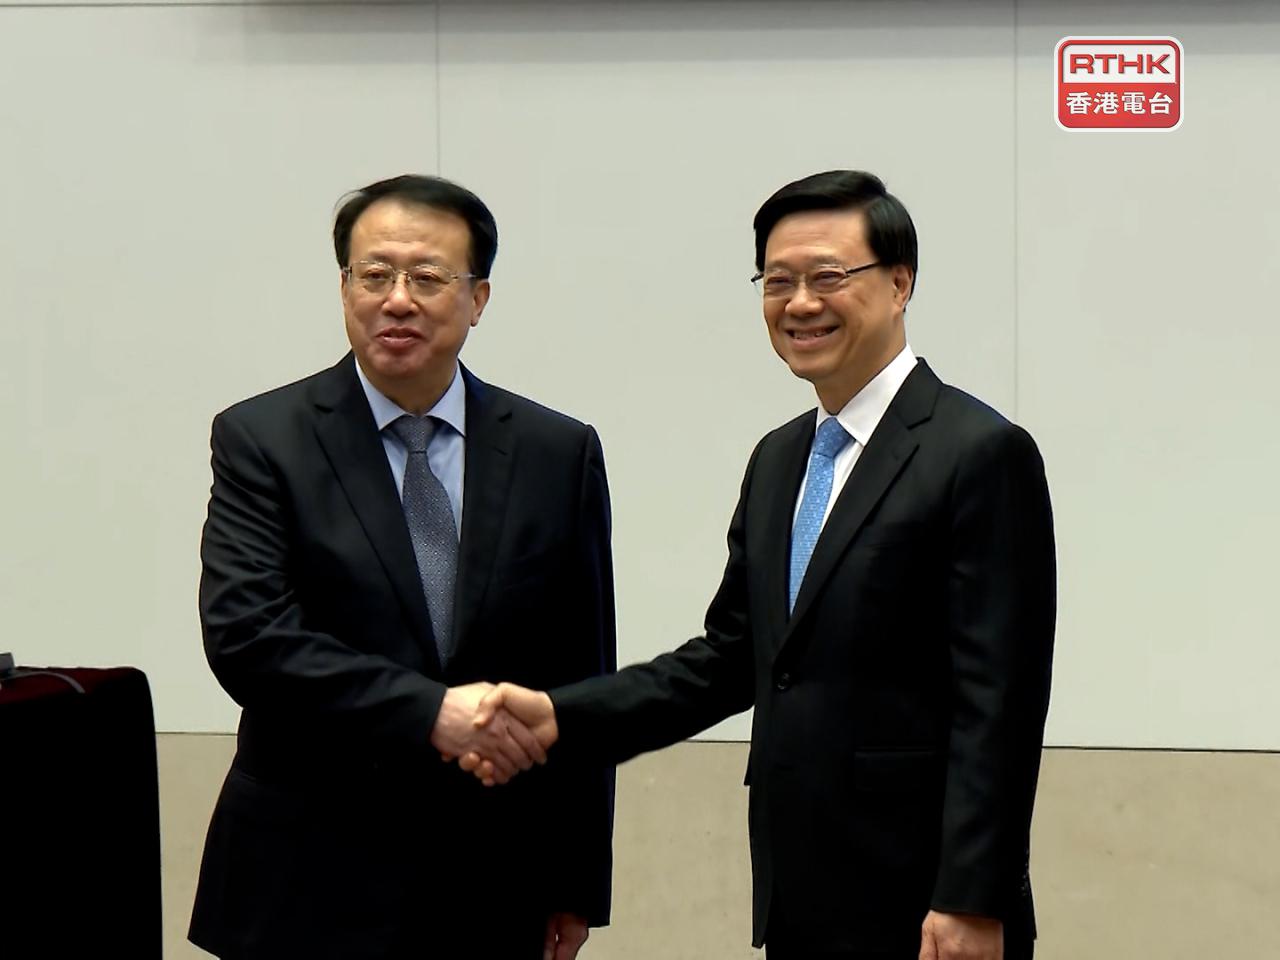 HK-Shanghai conference an important milestone: CE